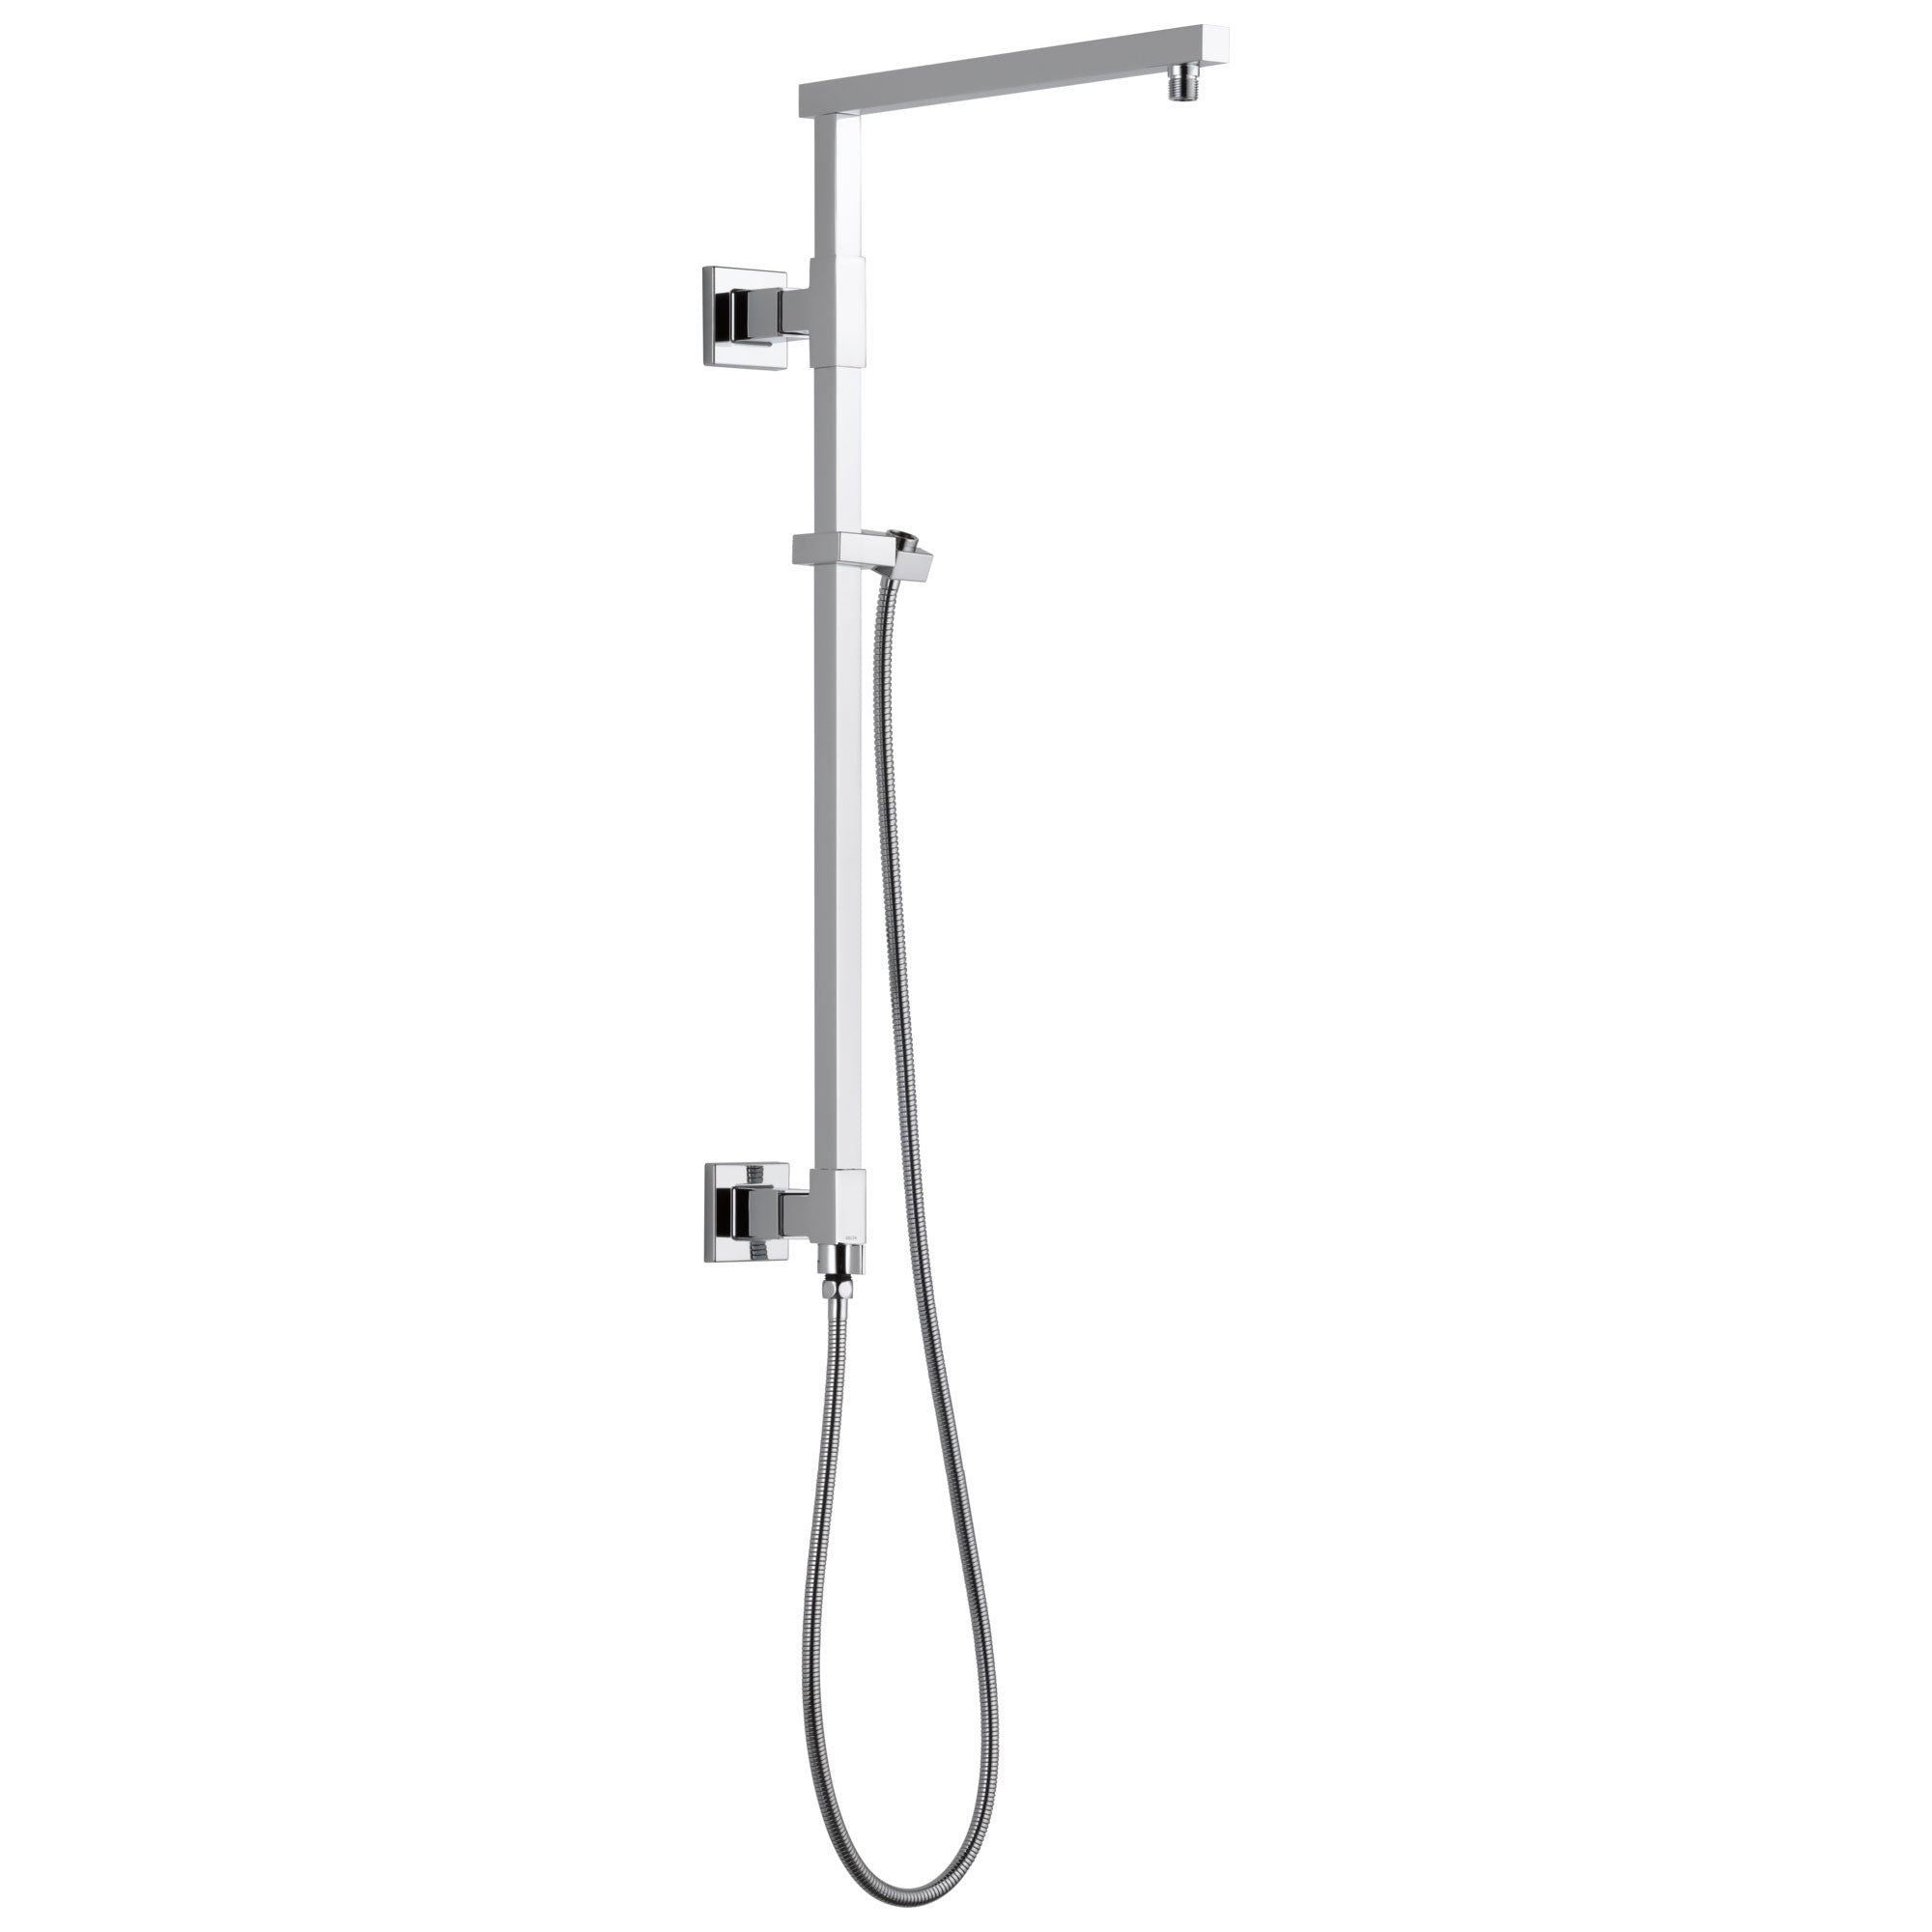 Delta Chrome Finish Emerge Modern Angular Square Shower Column 26" (Requires Showerhead, Hand Spray, and Control) D58420